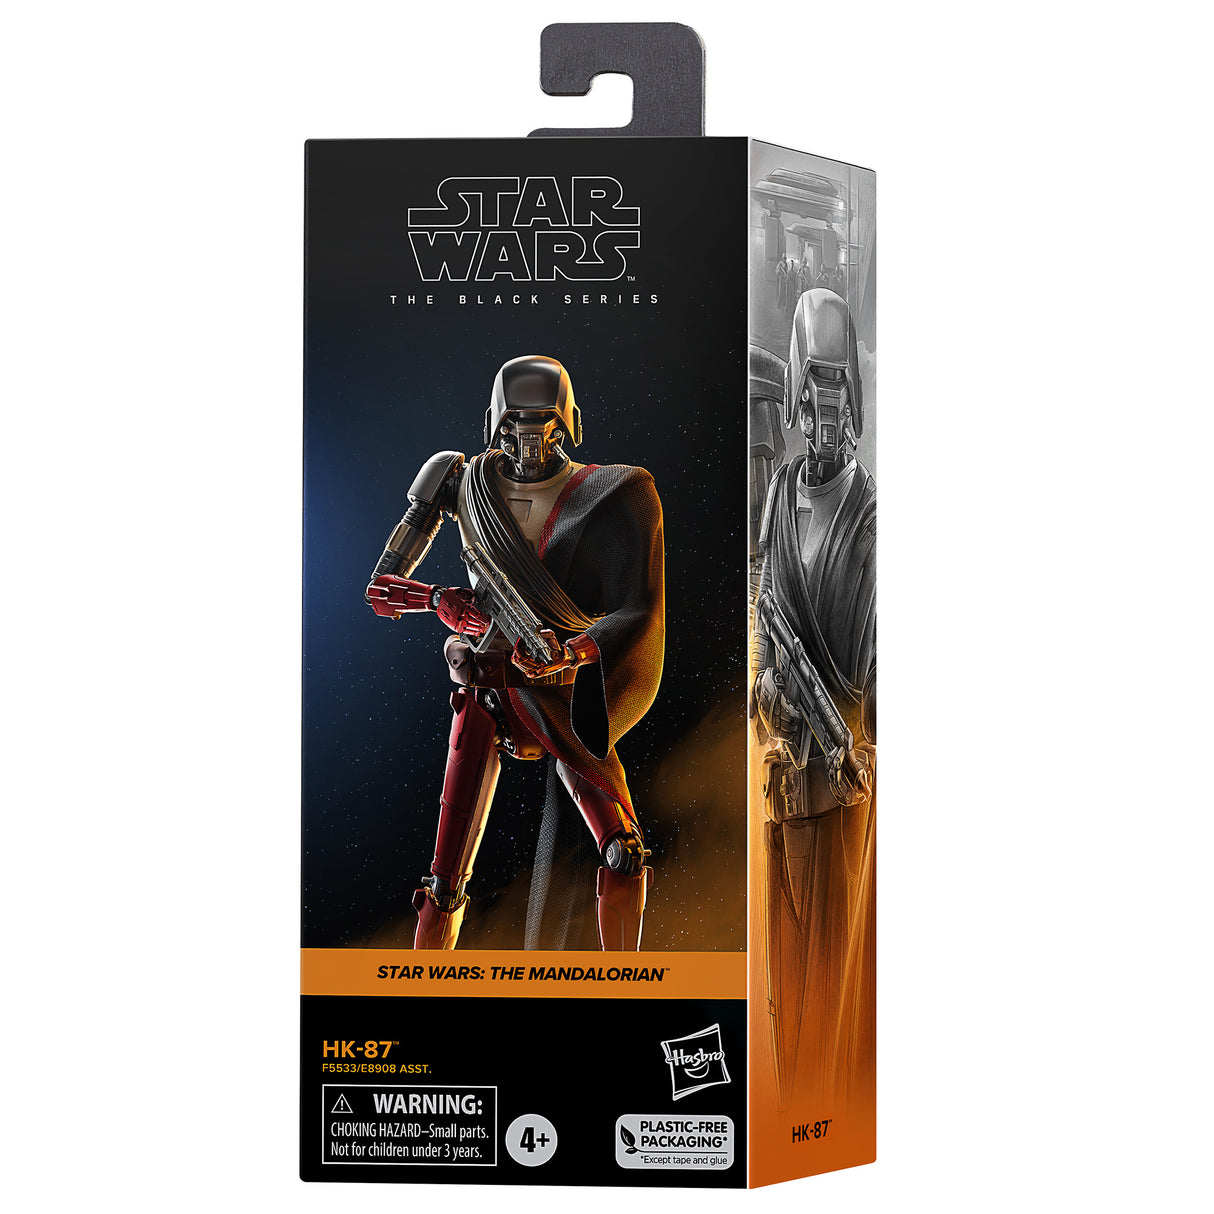 Star Wars The Black Series HK-87 Action Figure (6-inch)